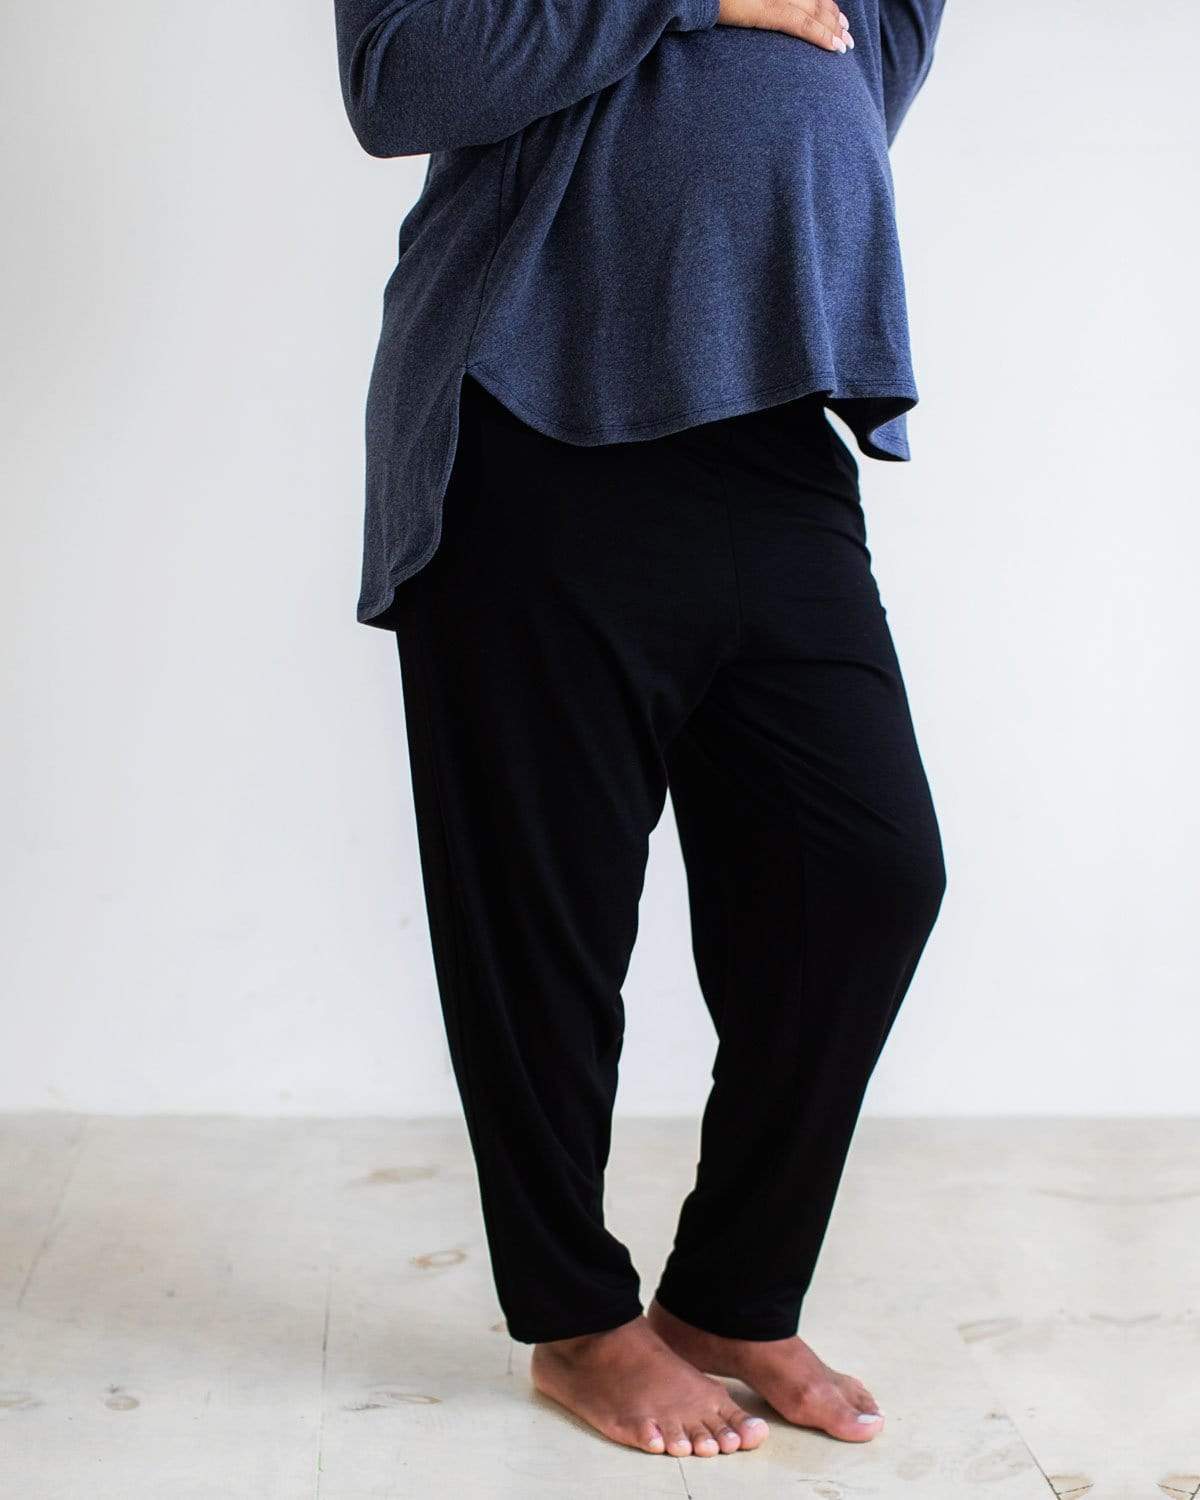 Heavenly Harem Pants - Asquith at Yoga-Artikel.ch - Yoga Wear - Maternity  Clothes